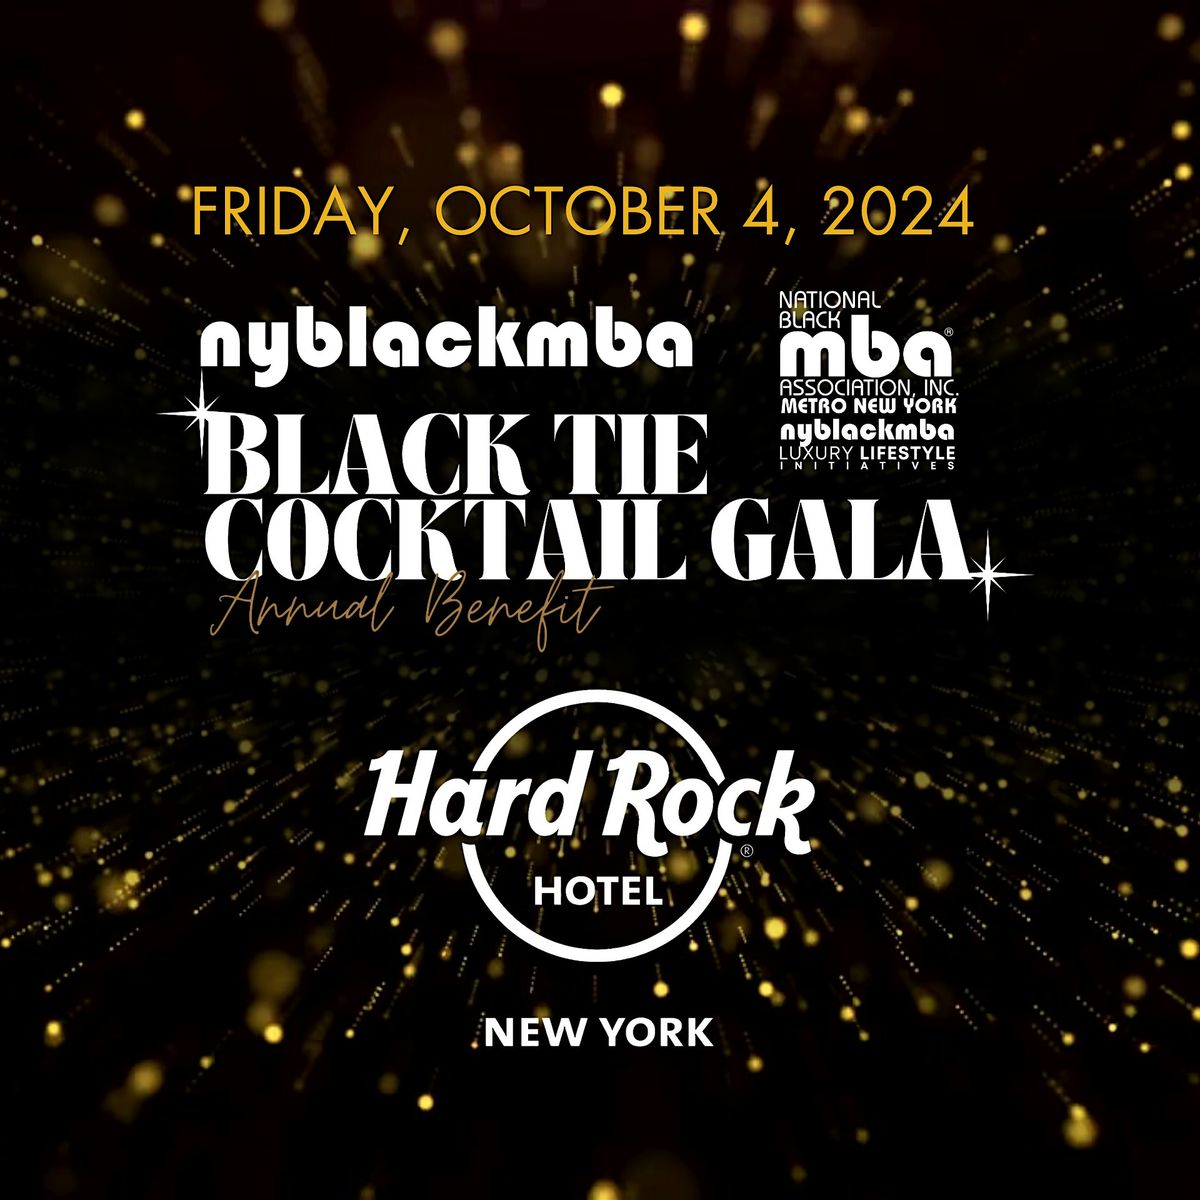 2024 NYBLACKMBA Black Tie Cocktail Gala at the Hard Rock Hotel - Times Square